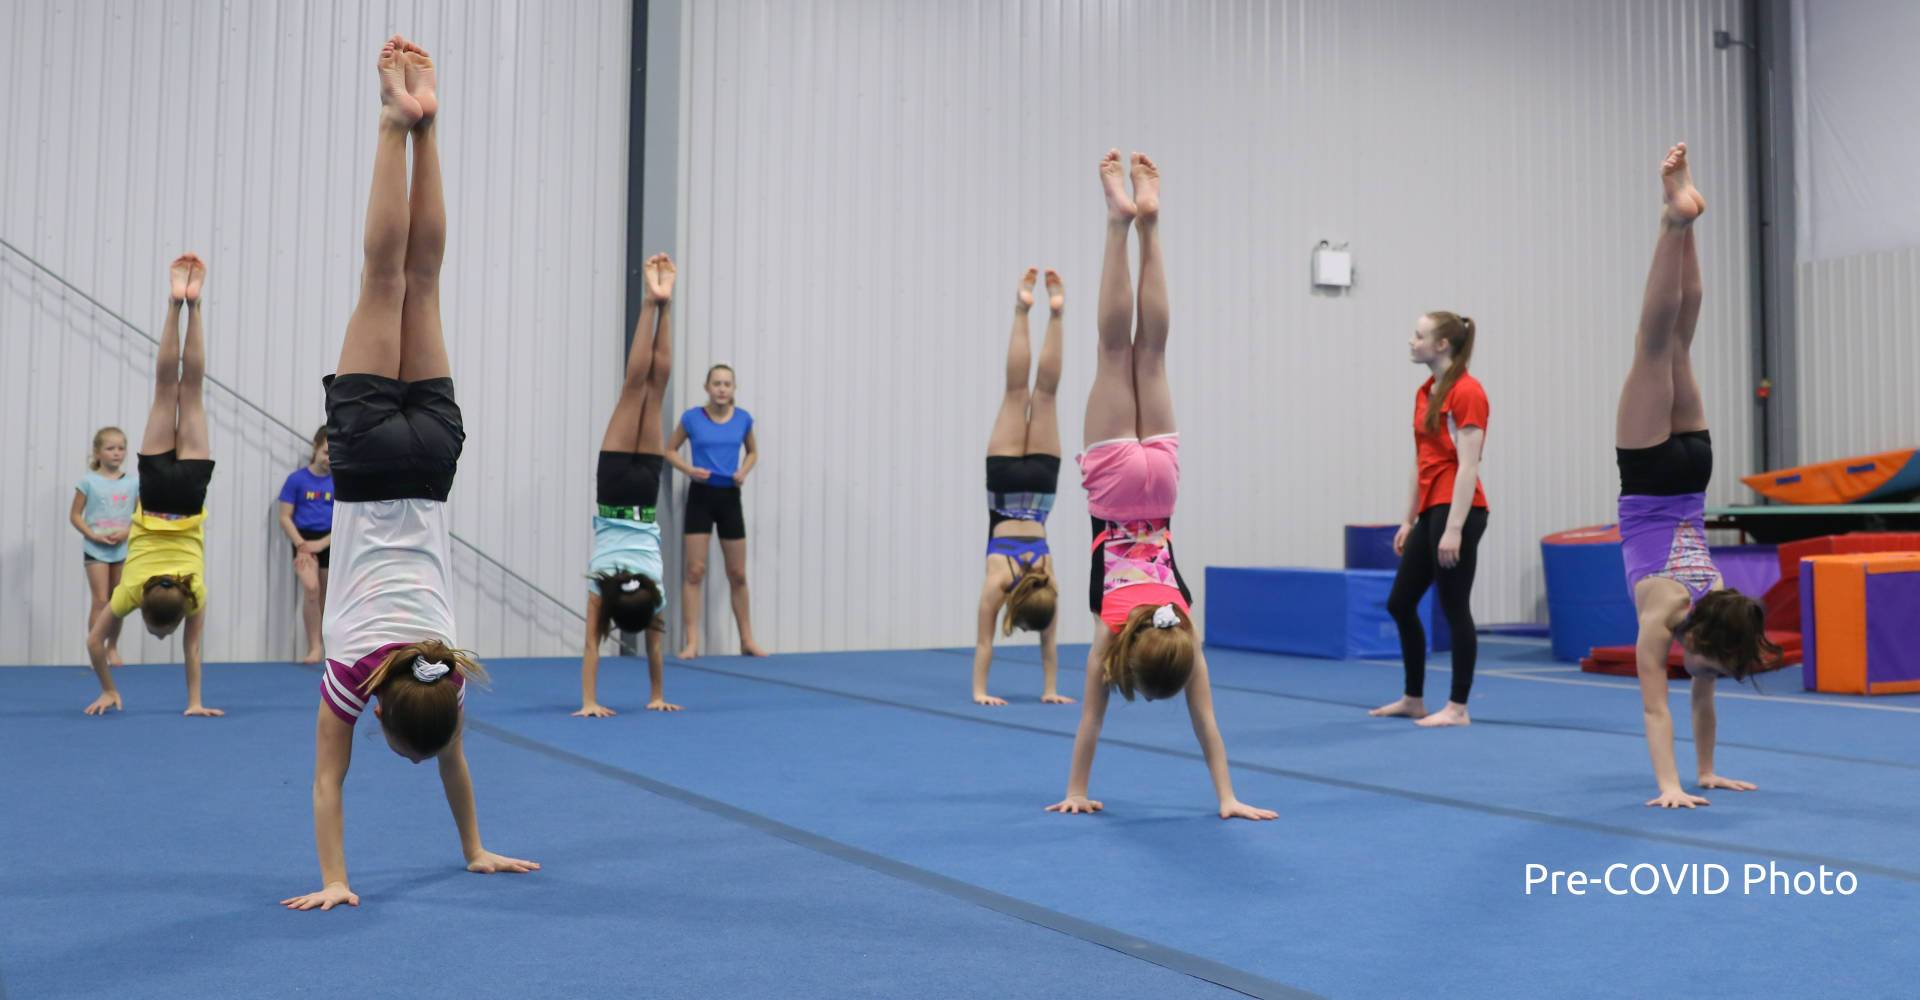 Gymnasts practicing handstands on the spring floor at the Gymworld gymnastics facility in North London